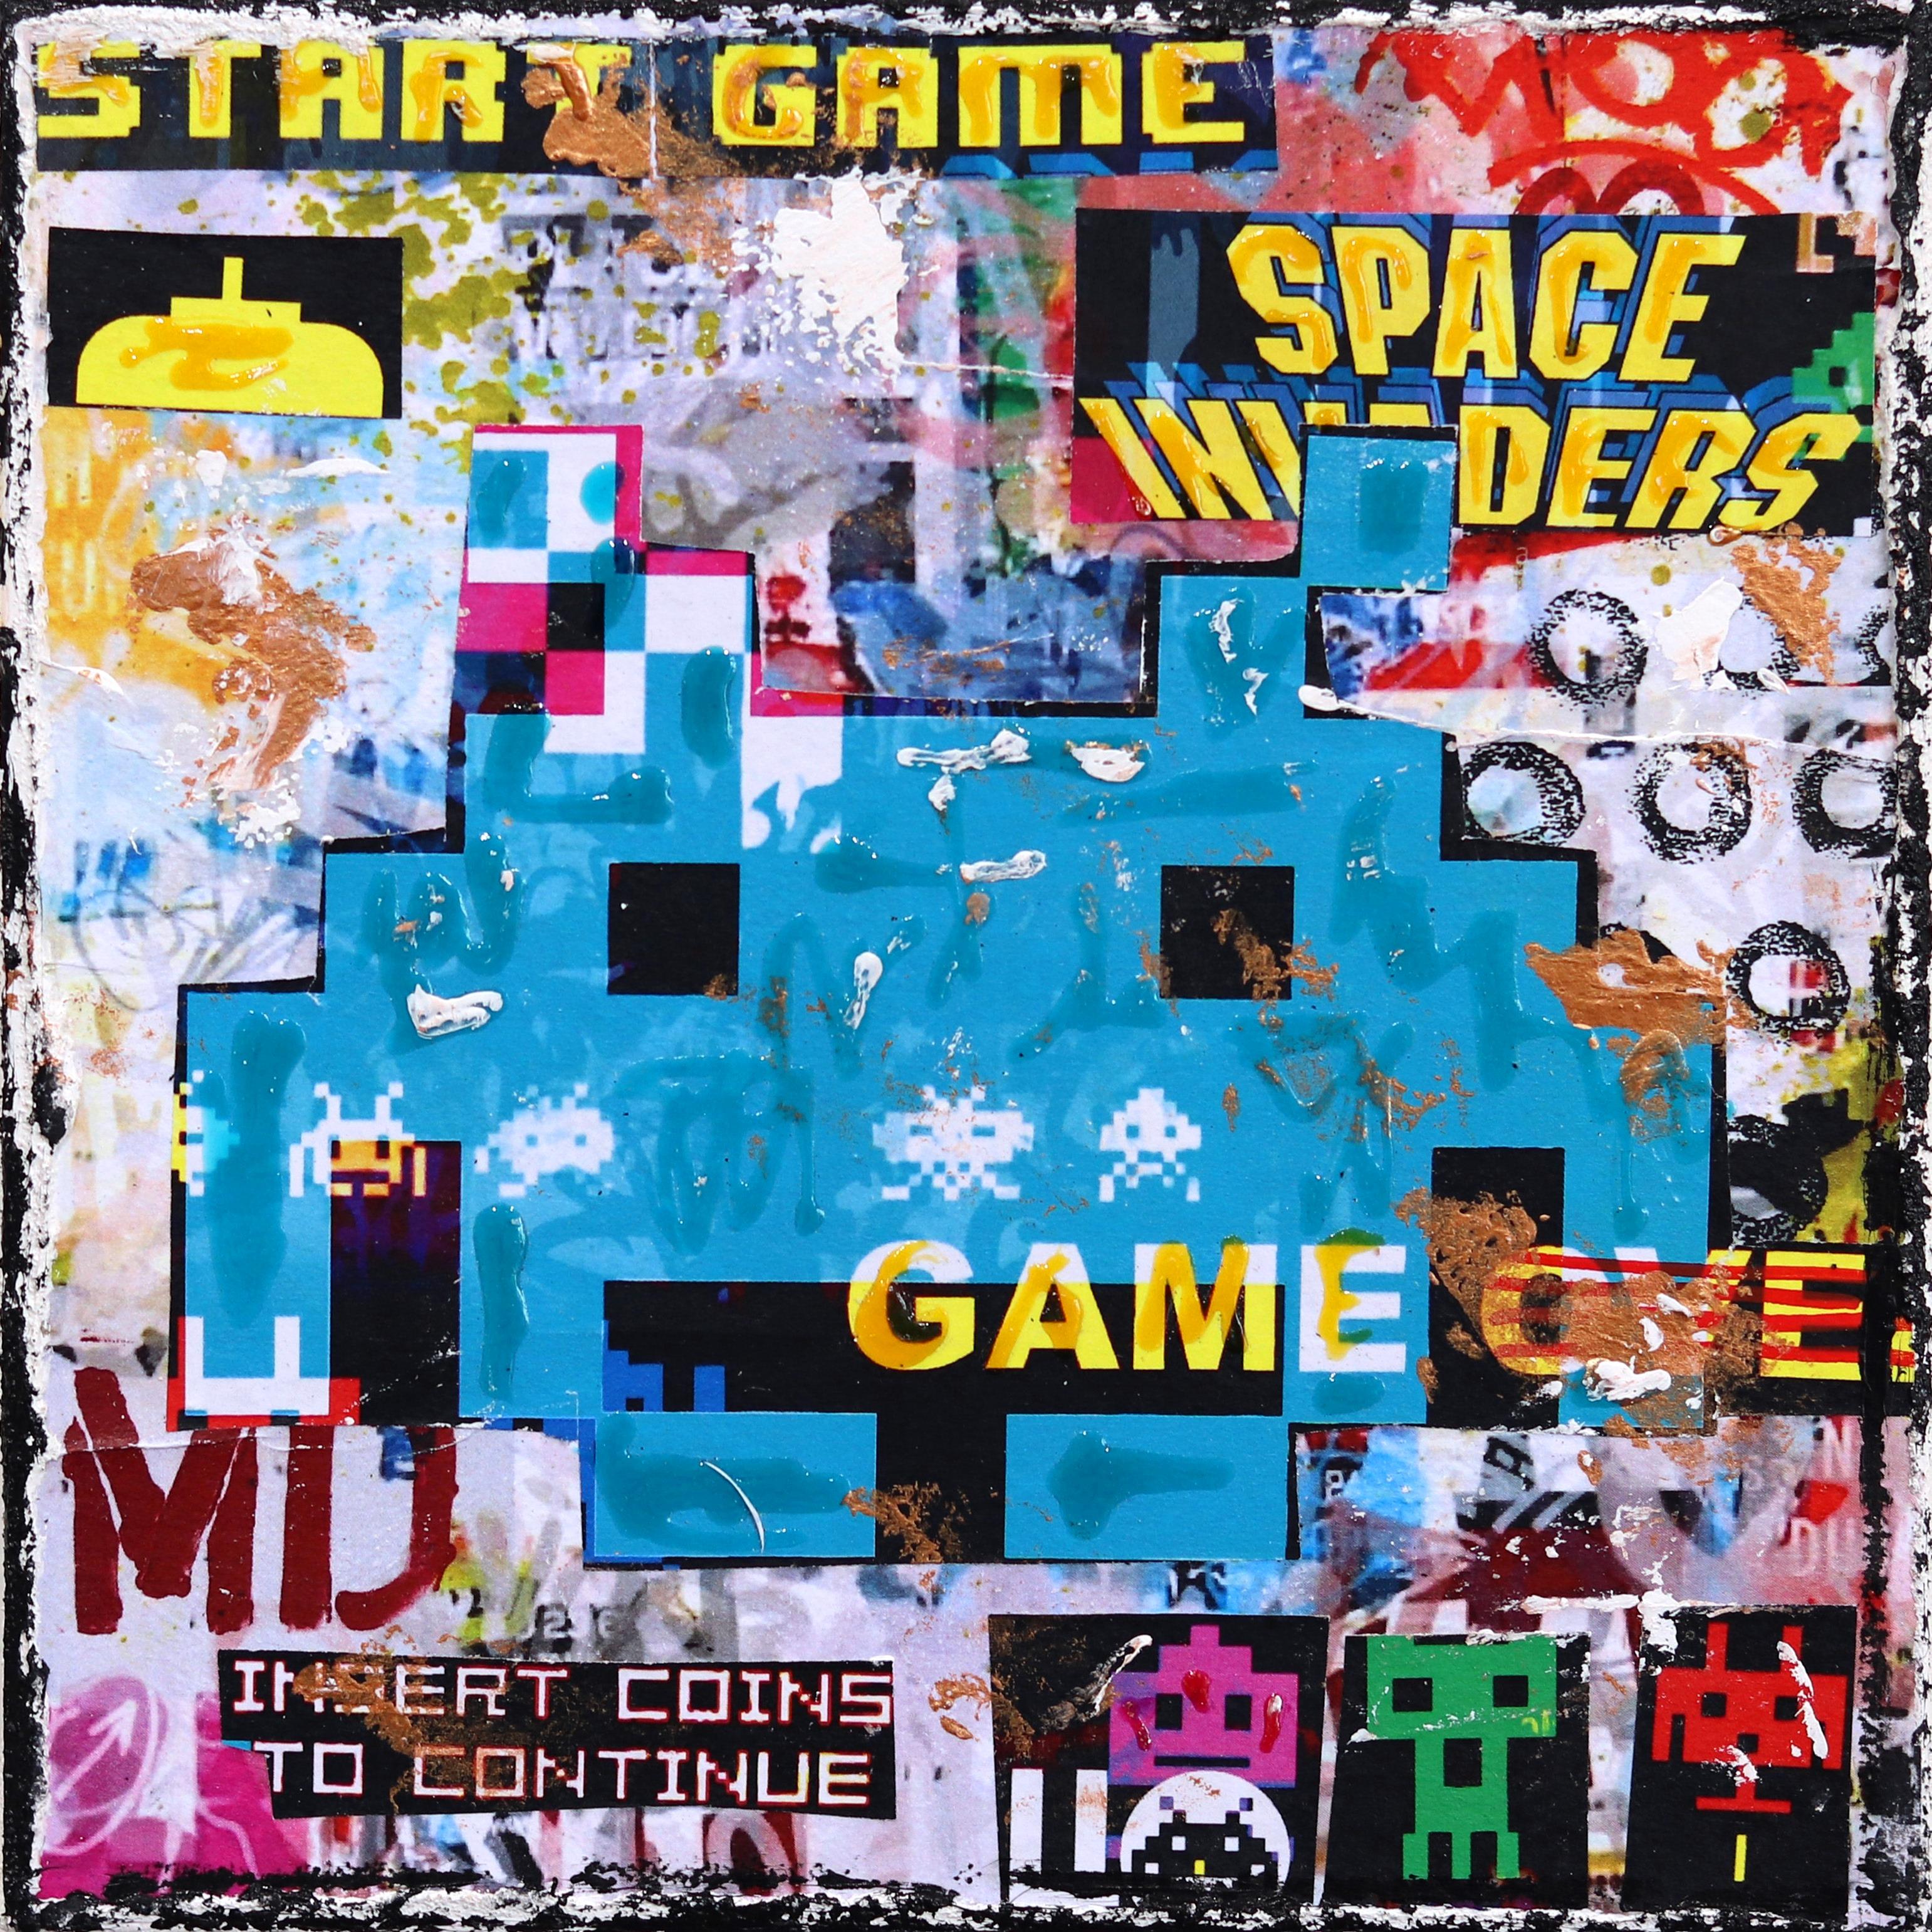 "Space Invaders" - Vintage Arcade Inspired artwork by Marion Duschletta